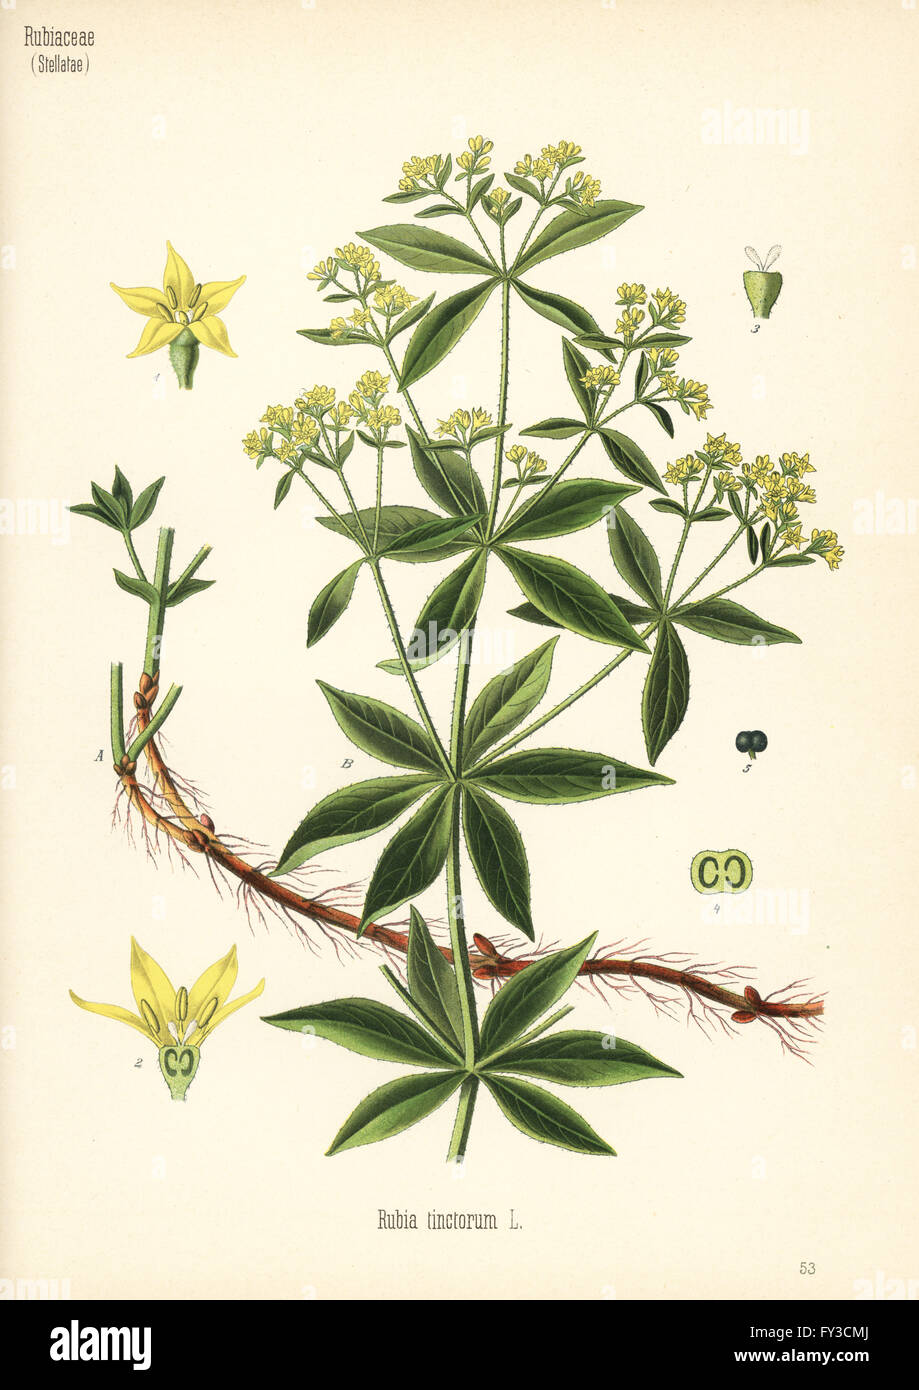 Common madder, Rubia tinctorum. Chromolithograph after a botanical illustration from Hermann Adolph Koehler's Medicinal Plants, edited by Gustav Pabst, Koehler, Germany, 1887. Stock Photo